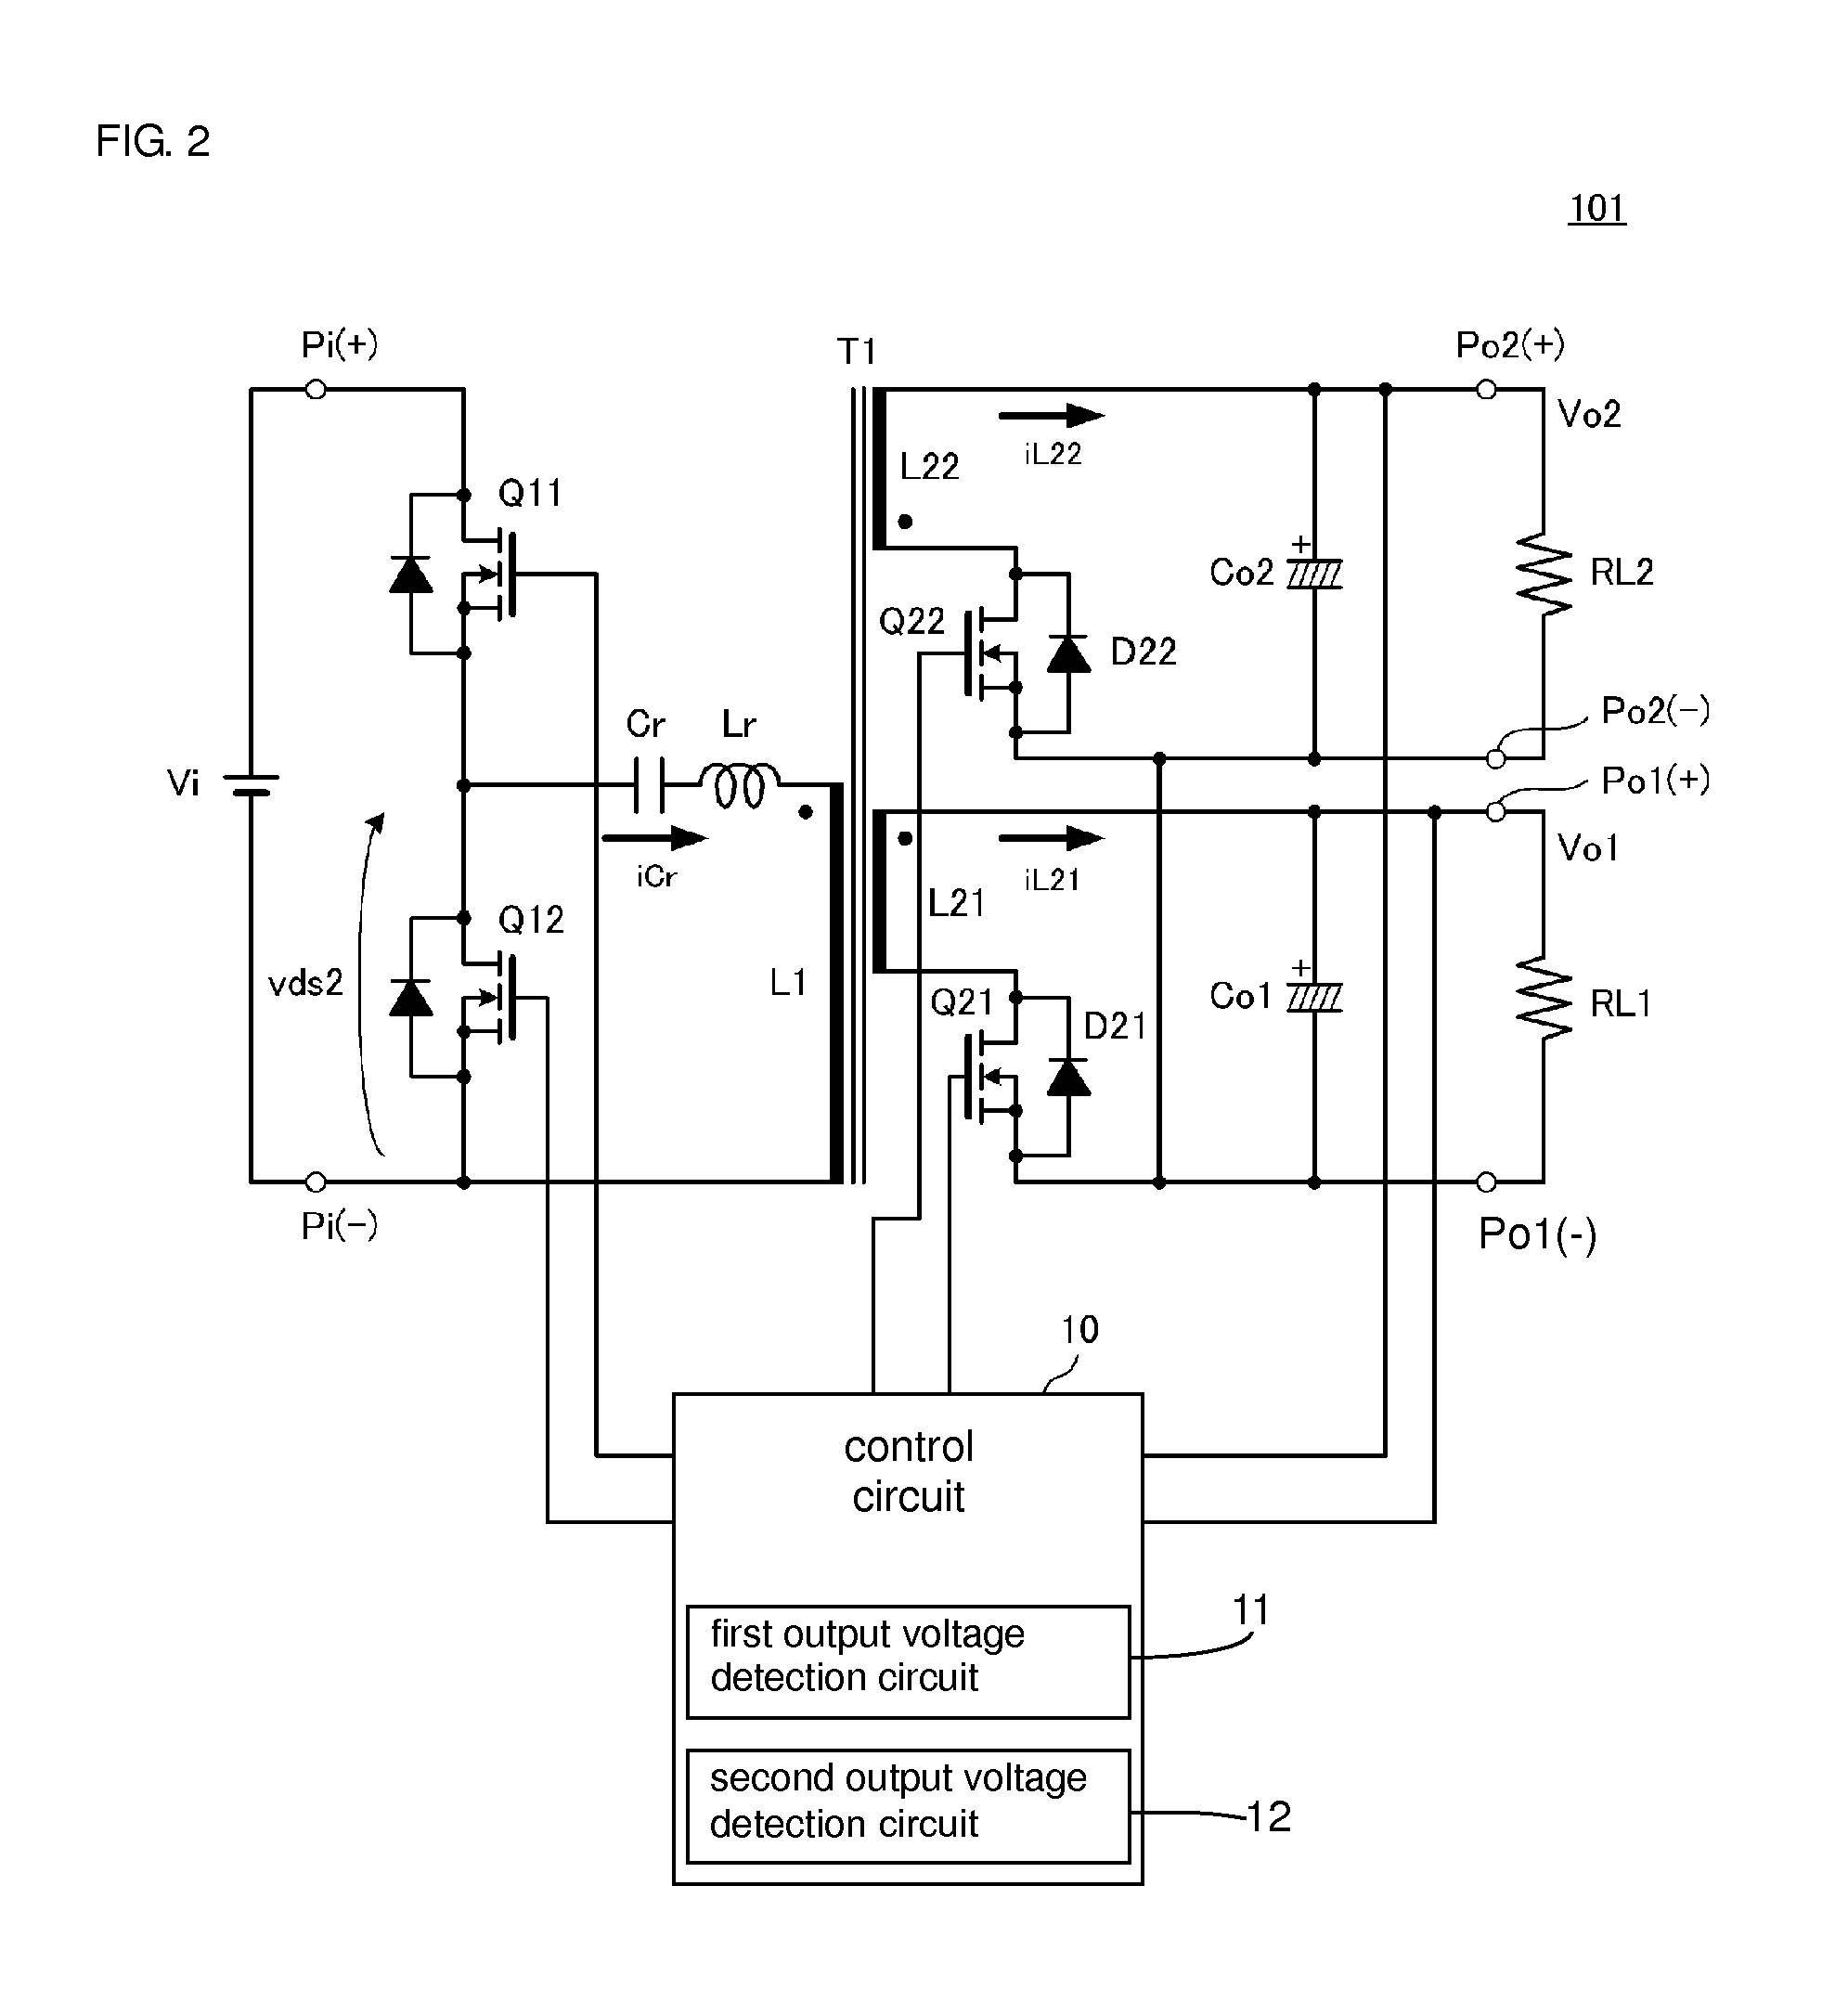 Switching power supply apparatus including a plurality of outputs